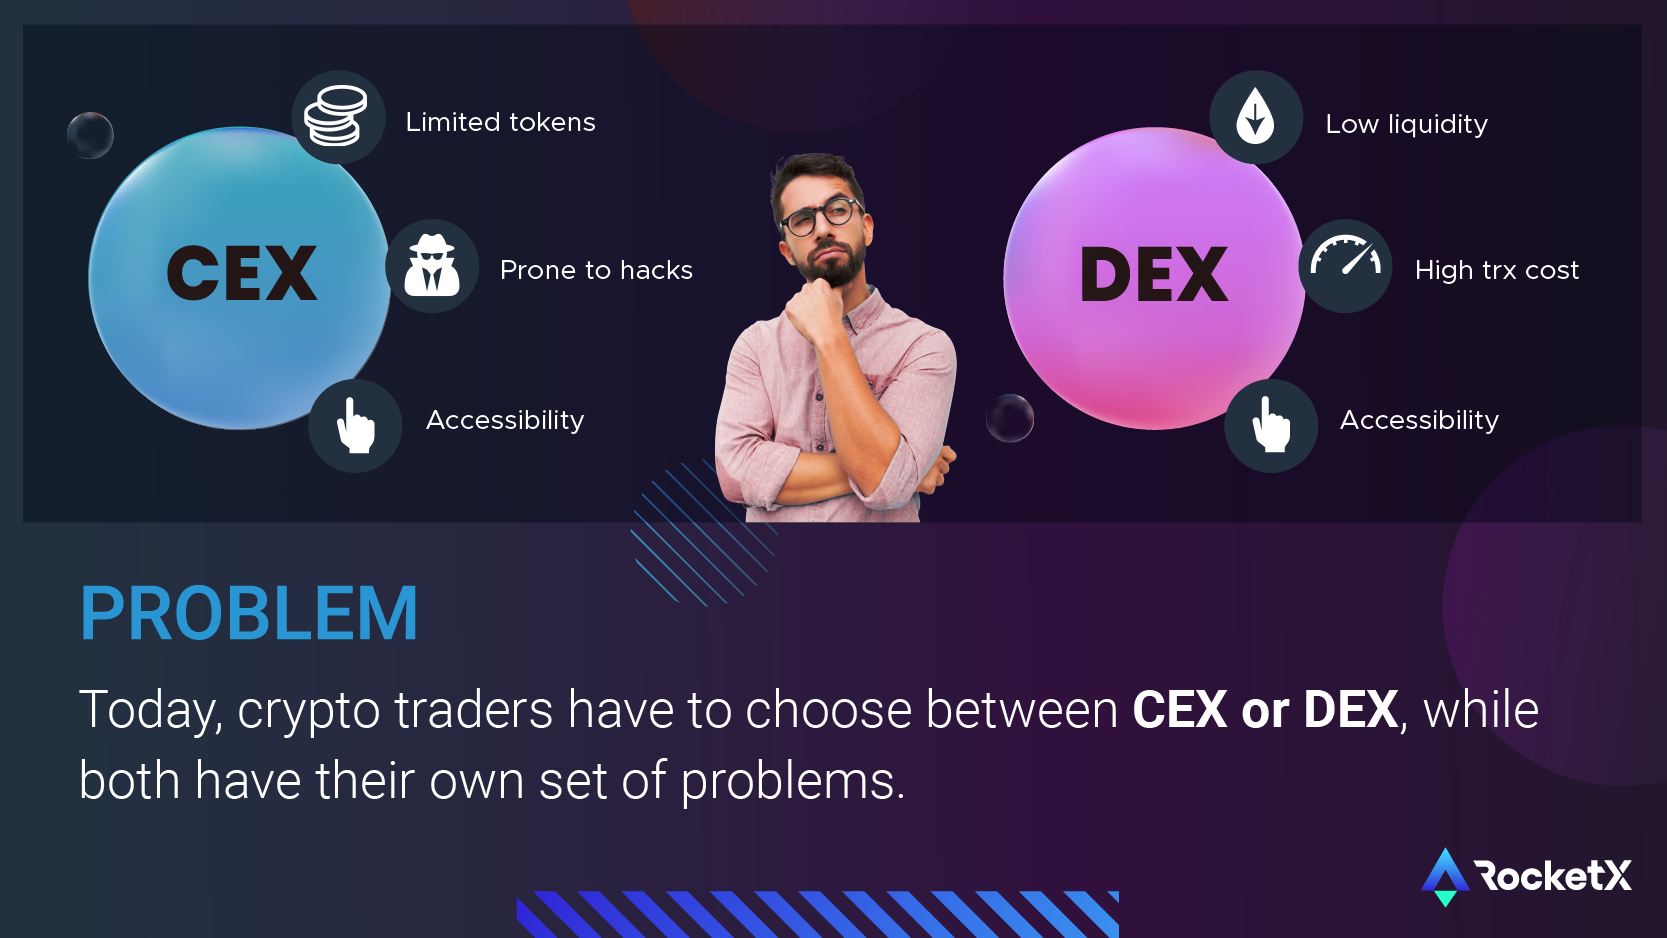 Crypto Investors today are stranded to choose between Centralized or Decentralized Crypto Exchange. Hybrid exchanges like RocketX is solving this problem with their innovative approach.